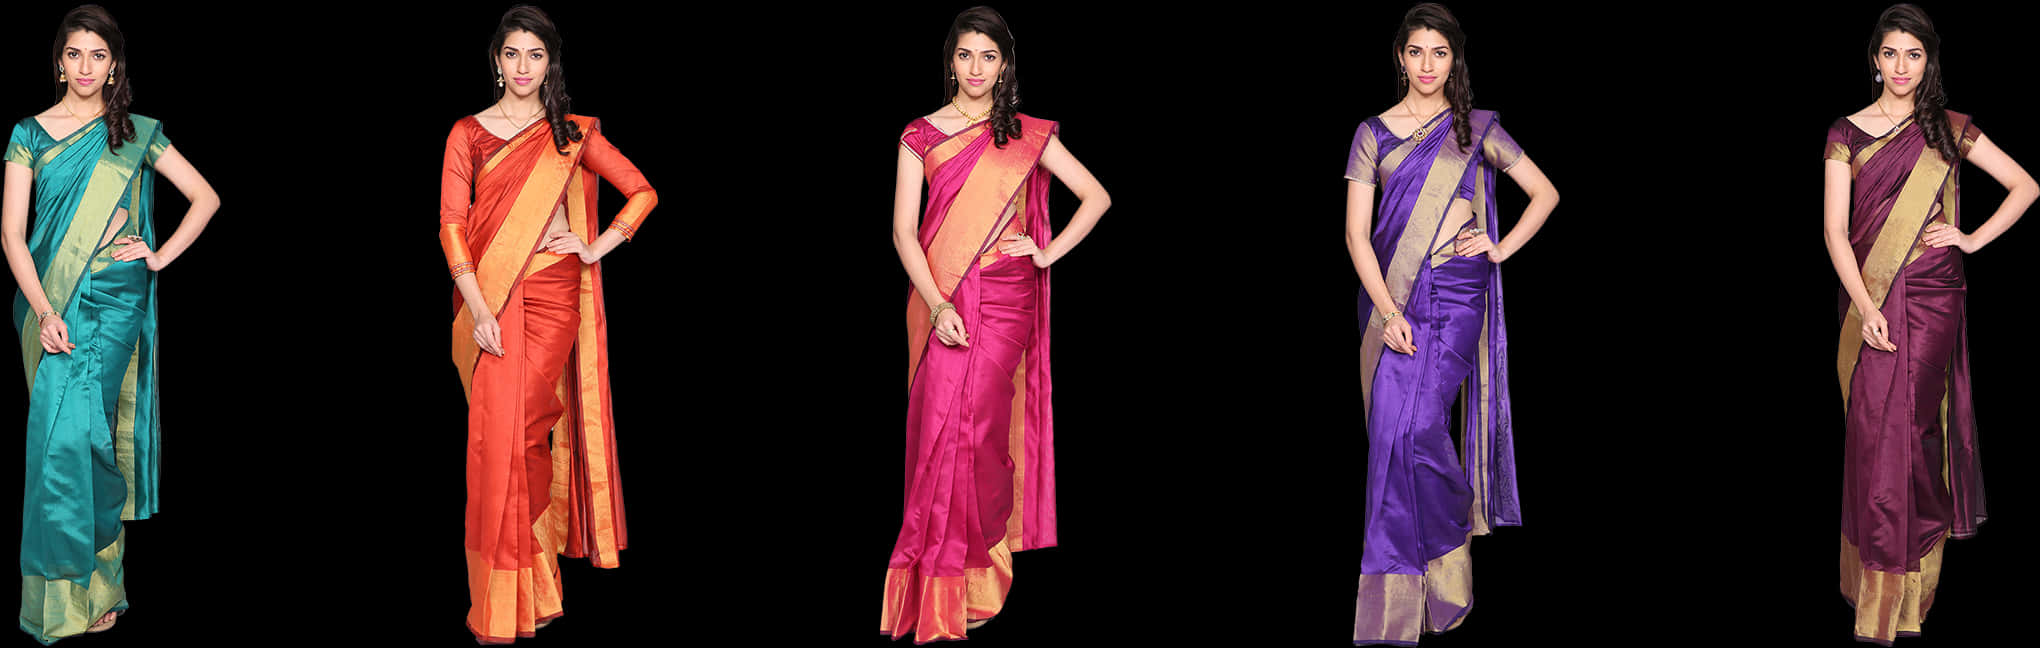 A Woman In A Pink And Orange Sari